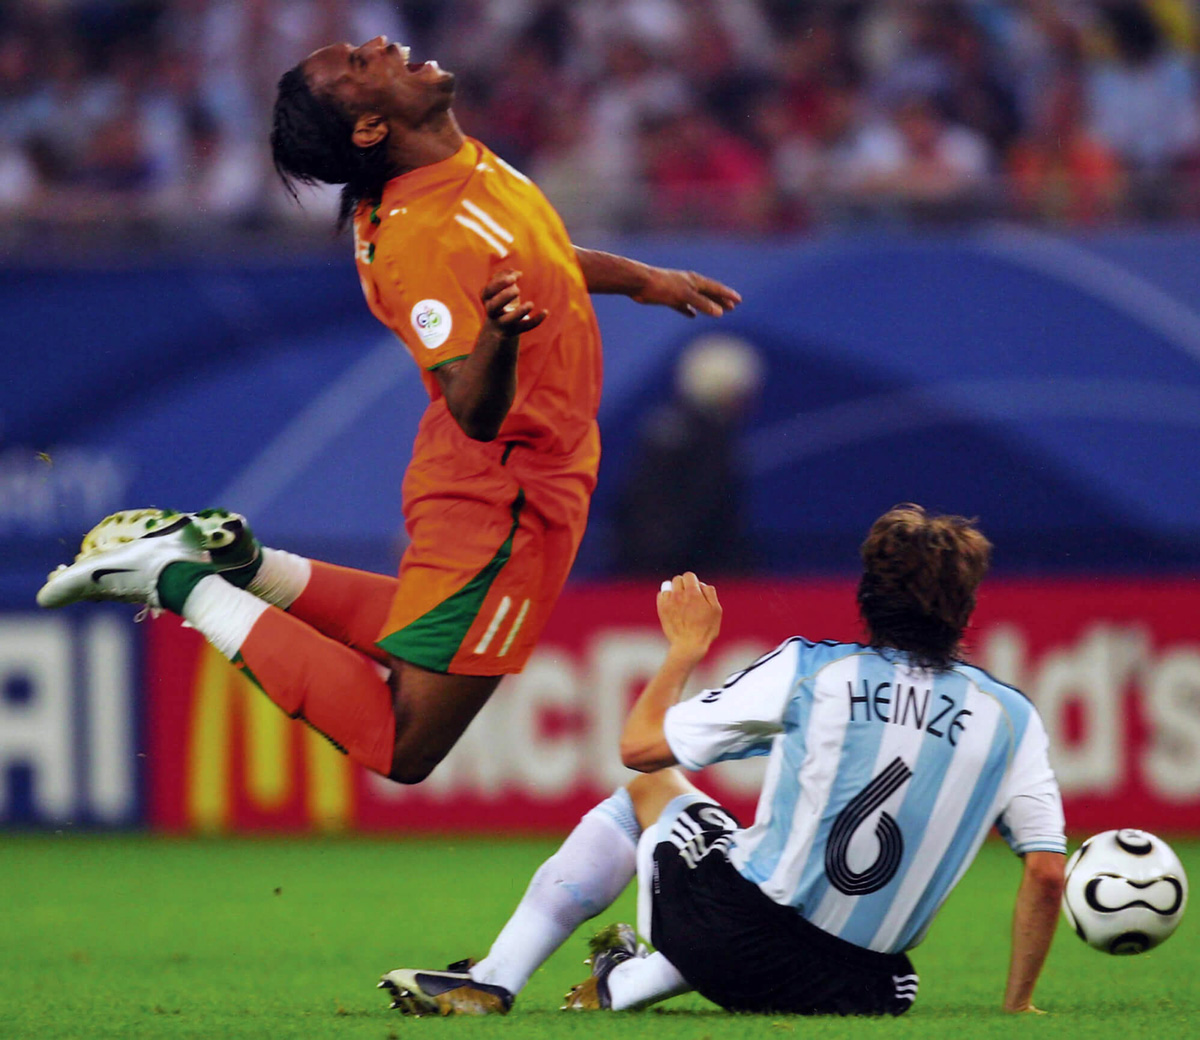 A form perfected. The Ivory Coast’s Didier Drogba demonstrates a classic “archer’s bow” as he is tackled by Argentina’s Gabriel Heinze in the 2006 World Cup. Photo Alex Livesey.